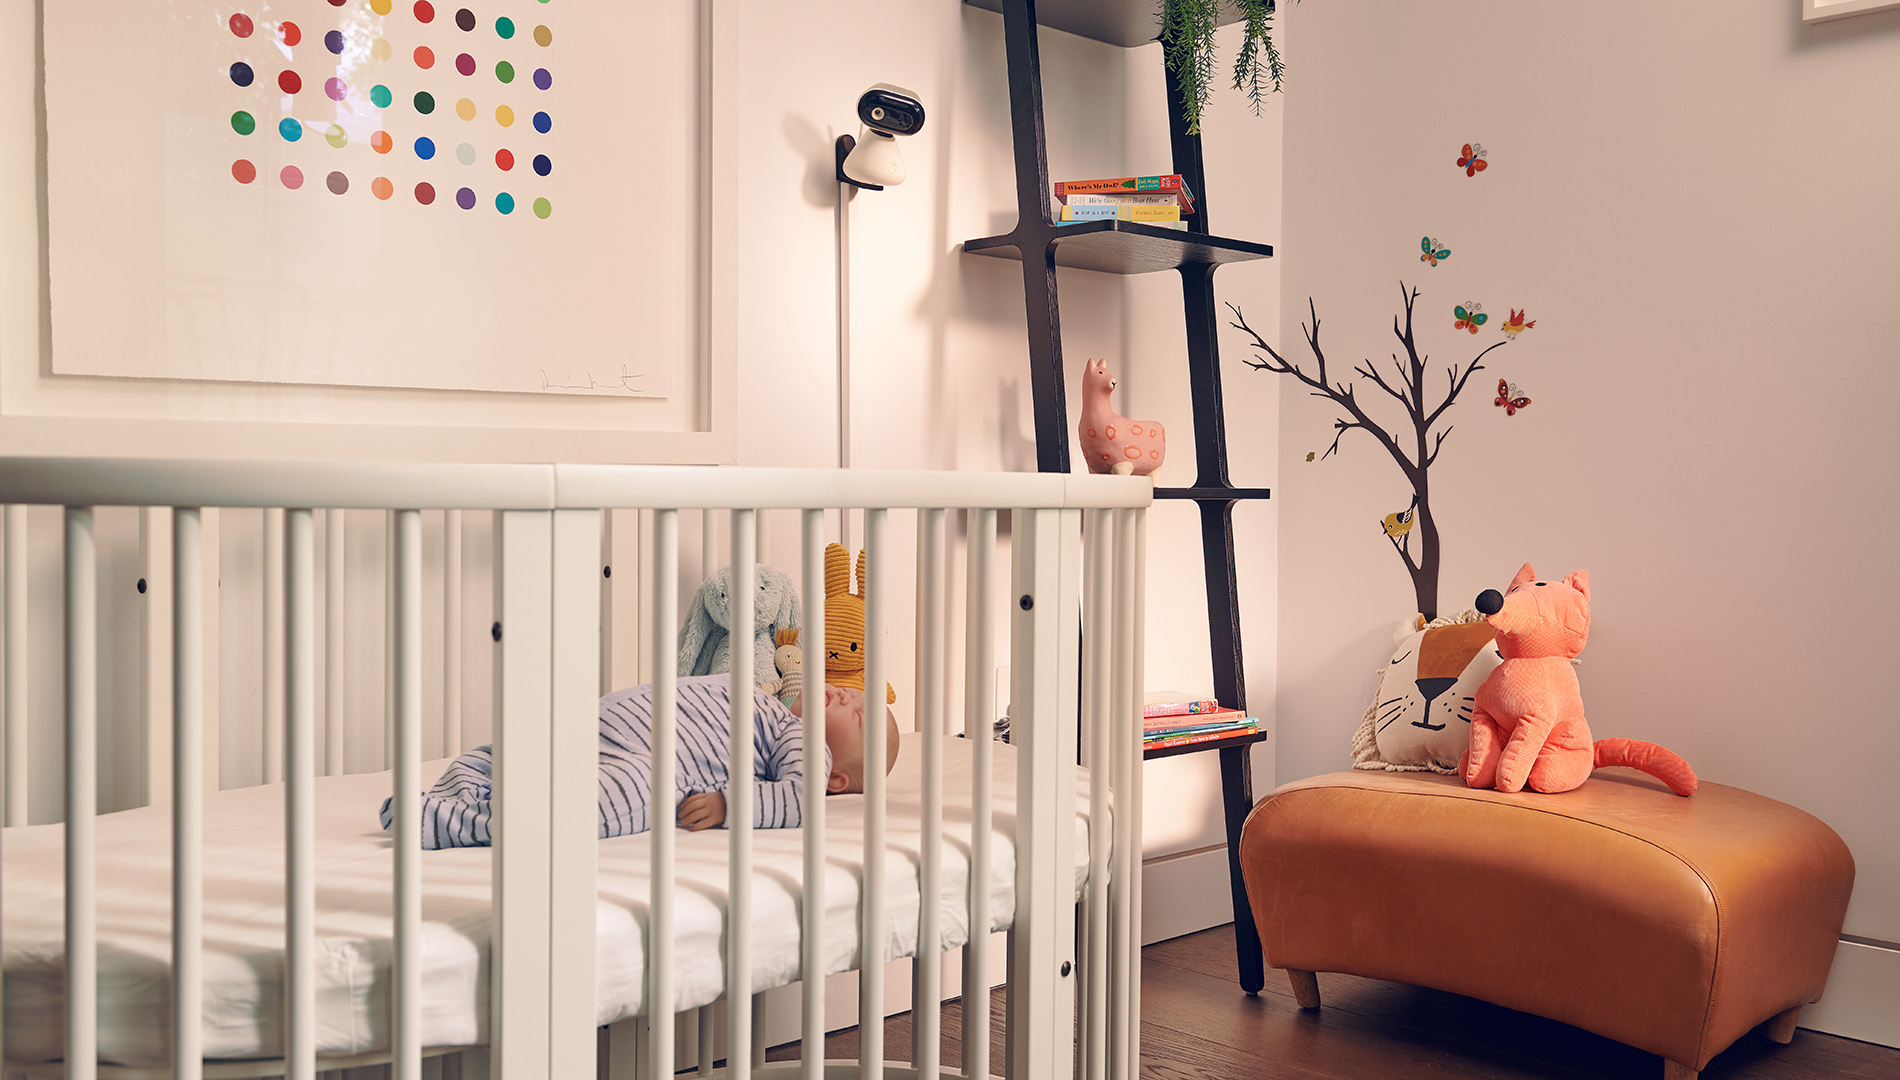 PIP1500-2 - camera wall mounted in nursery - content image